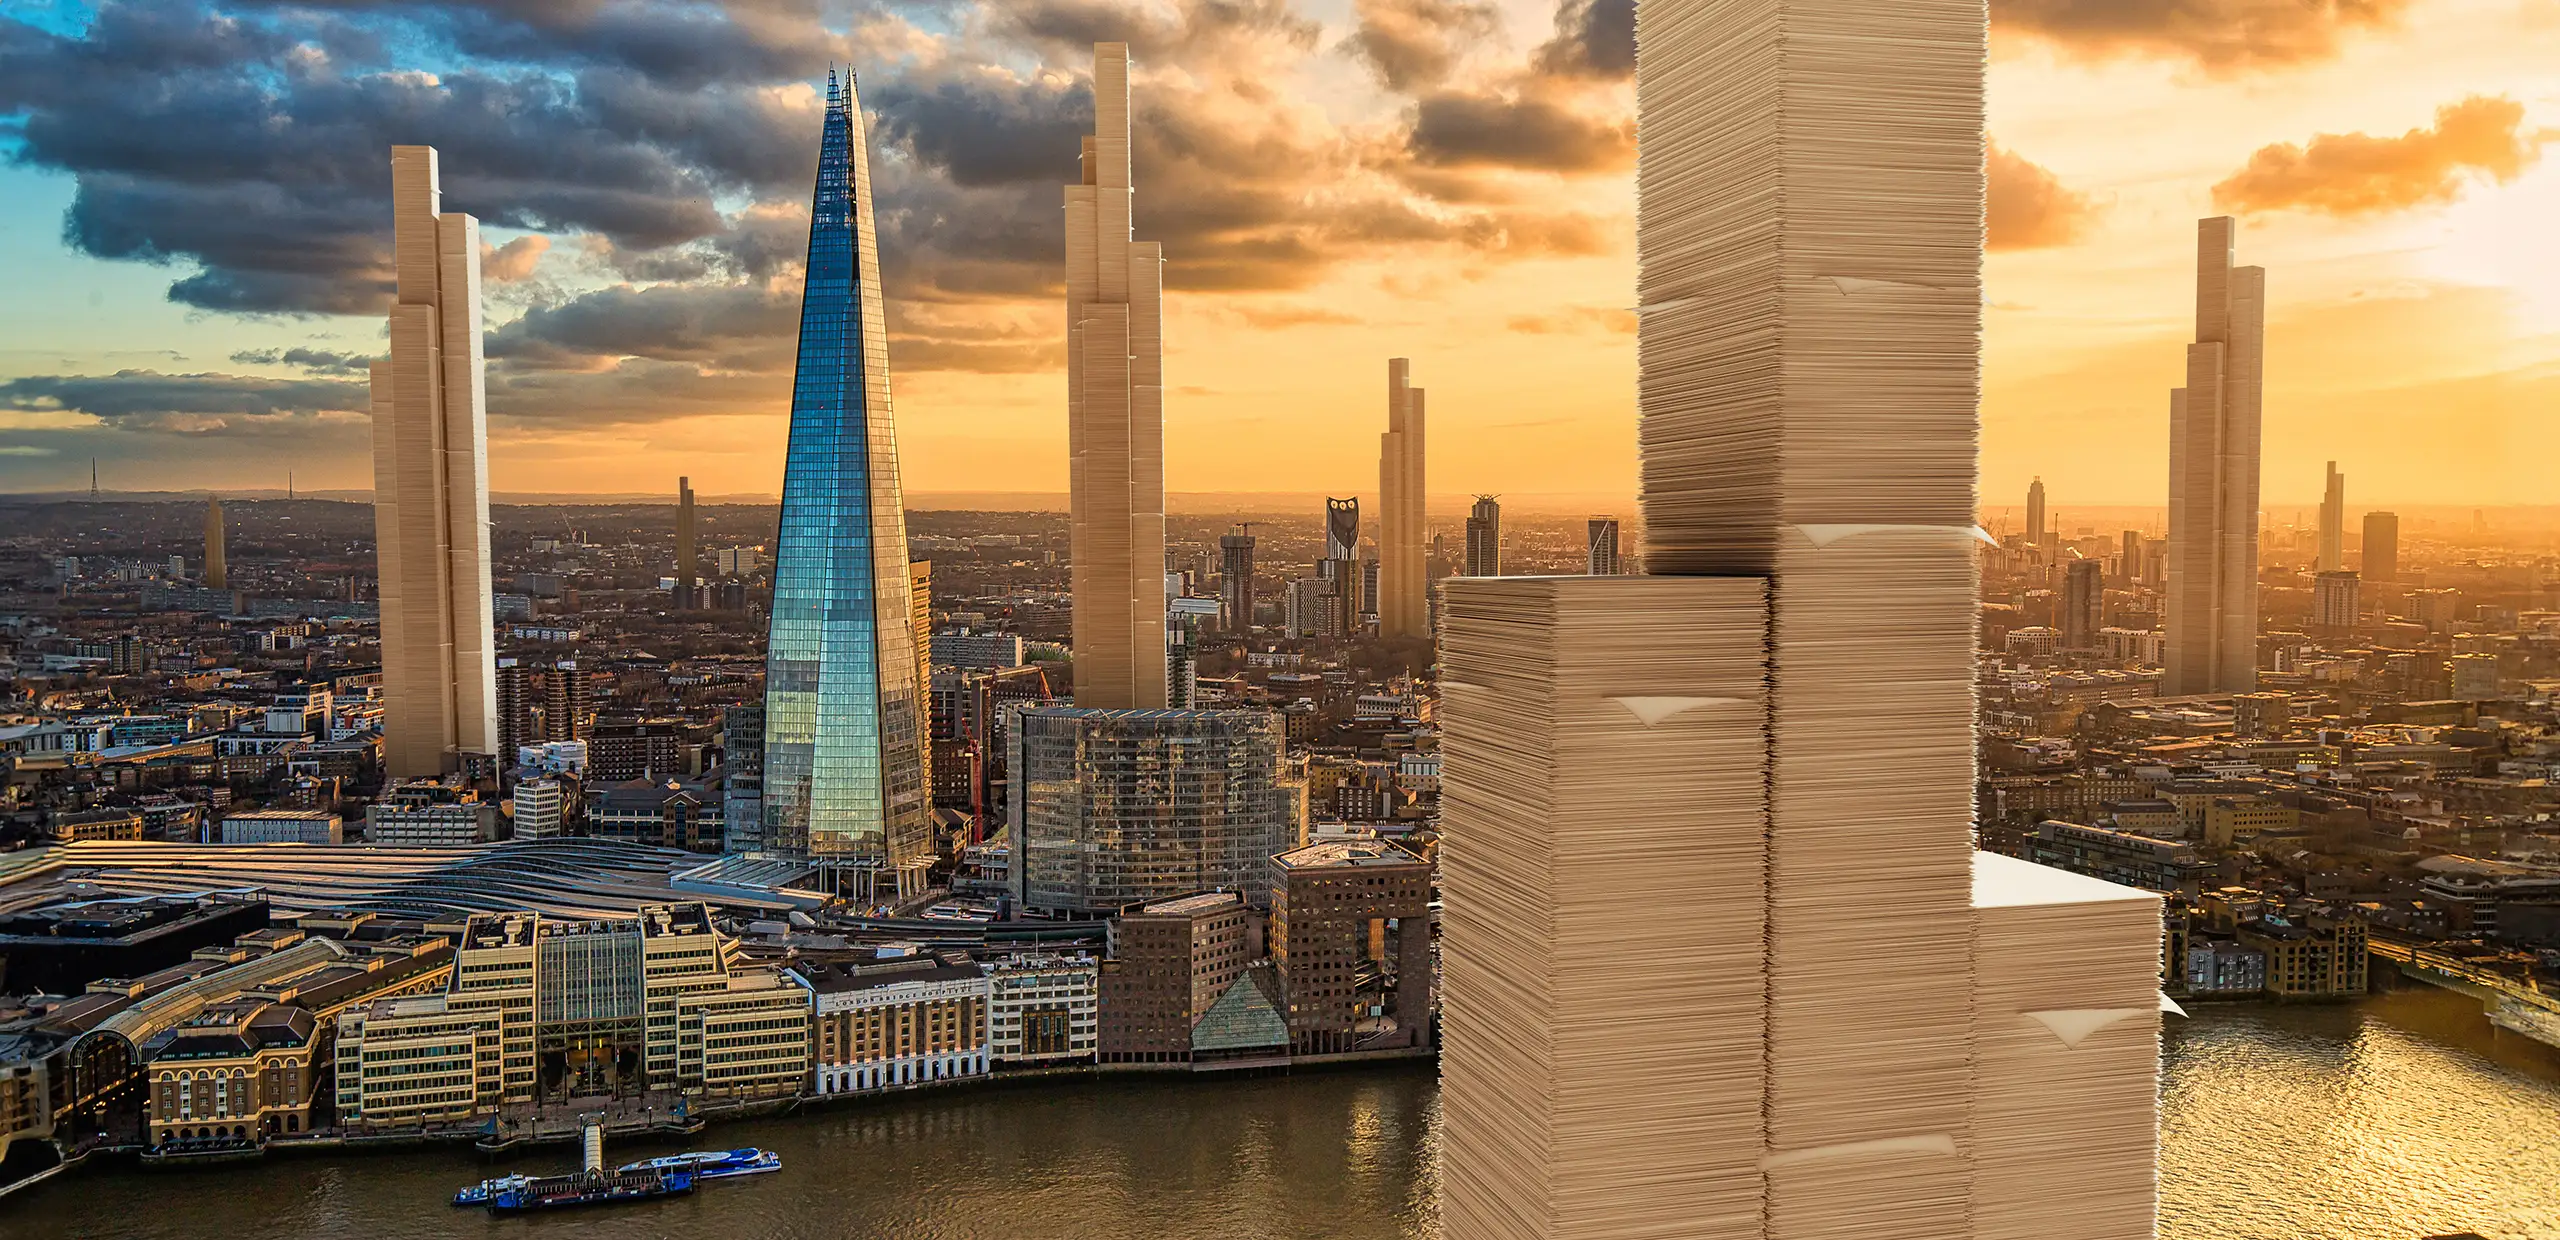 London Shard building surrounded by stacks of paper